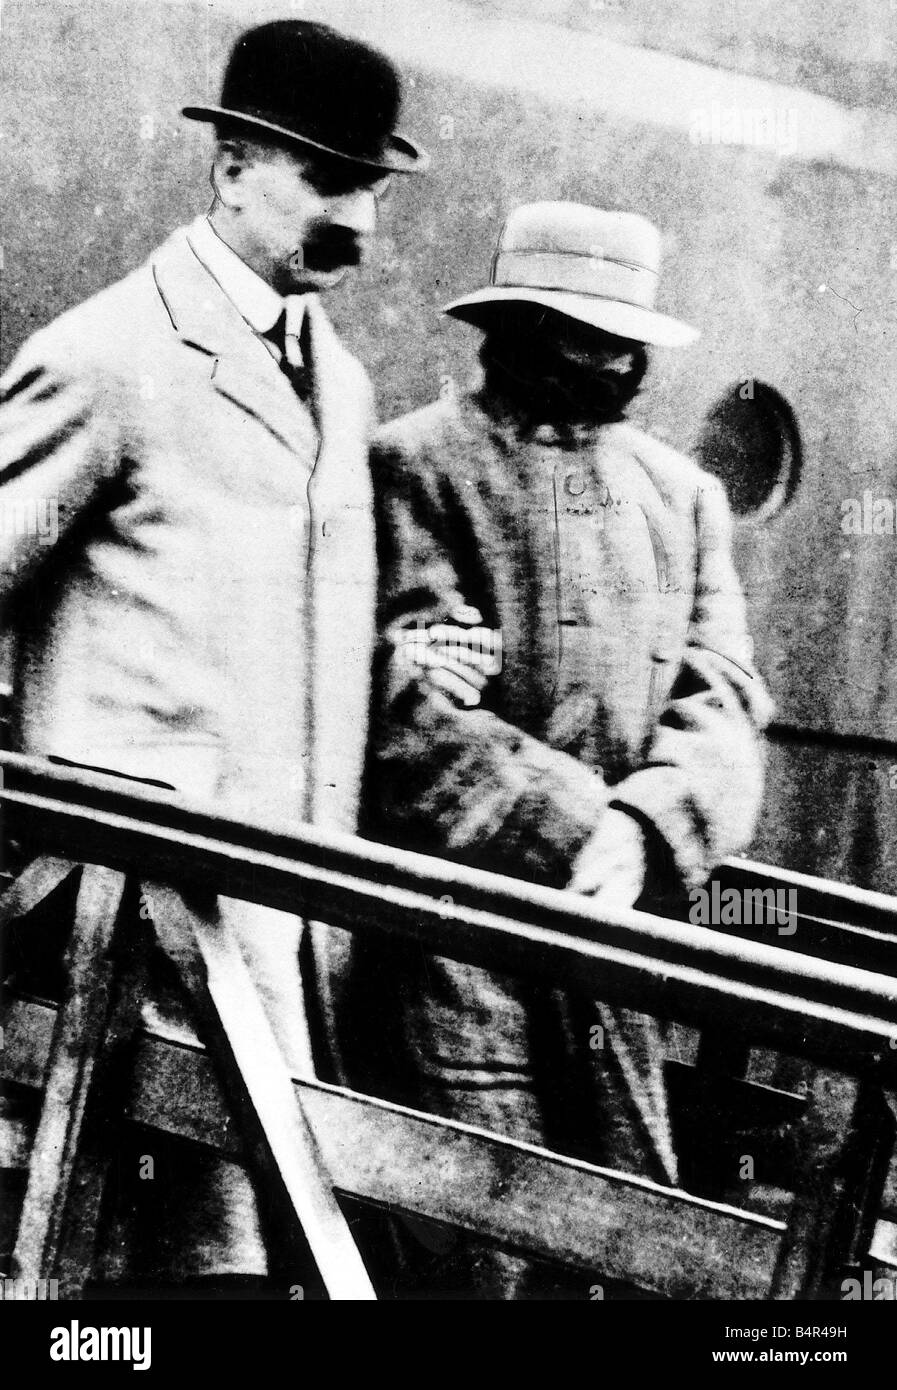 Dr Crippen with a scarf around his face is led from the liner Montrose by Inspector Dew in 1910 American Hawley Harvey Crippen murdered his wife variety artist Belle Elmore and buried her remains in the cellar of his London home and escaped to America with Mistress Ethel le Neve He was the first criminal captured following a radio message and was hanged August 1910 Stock Photo